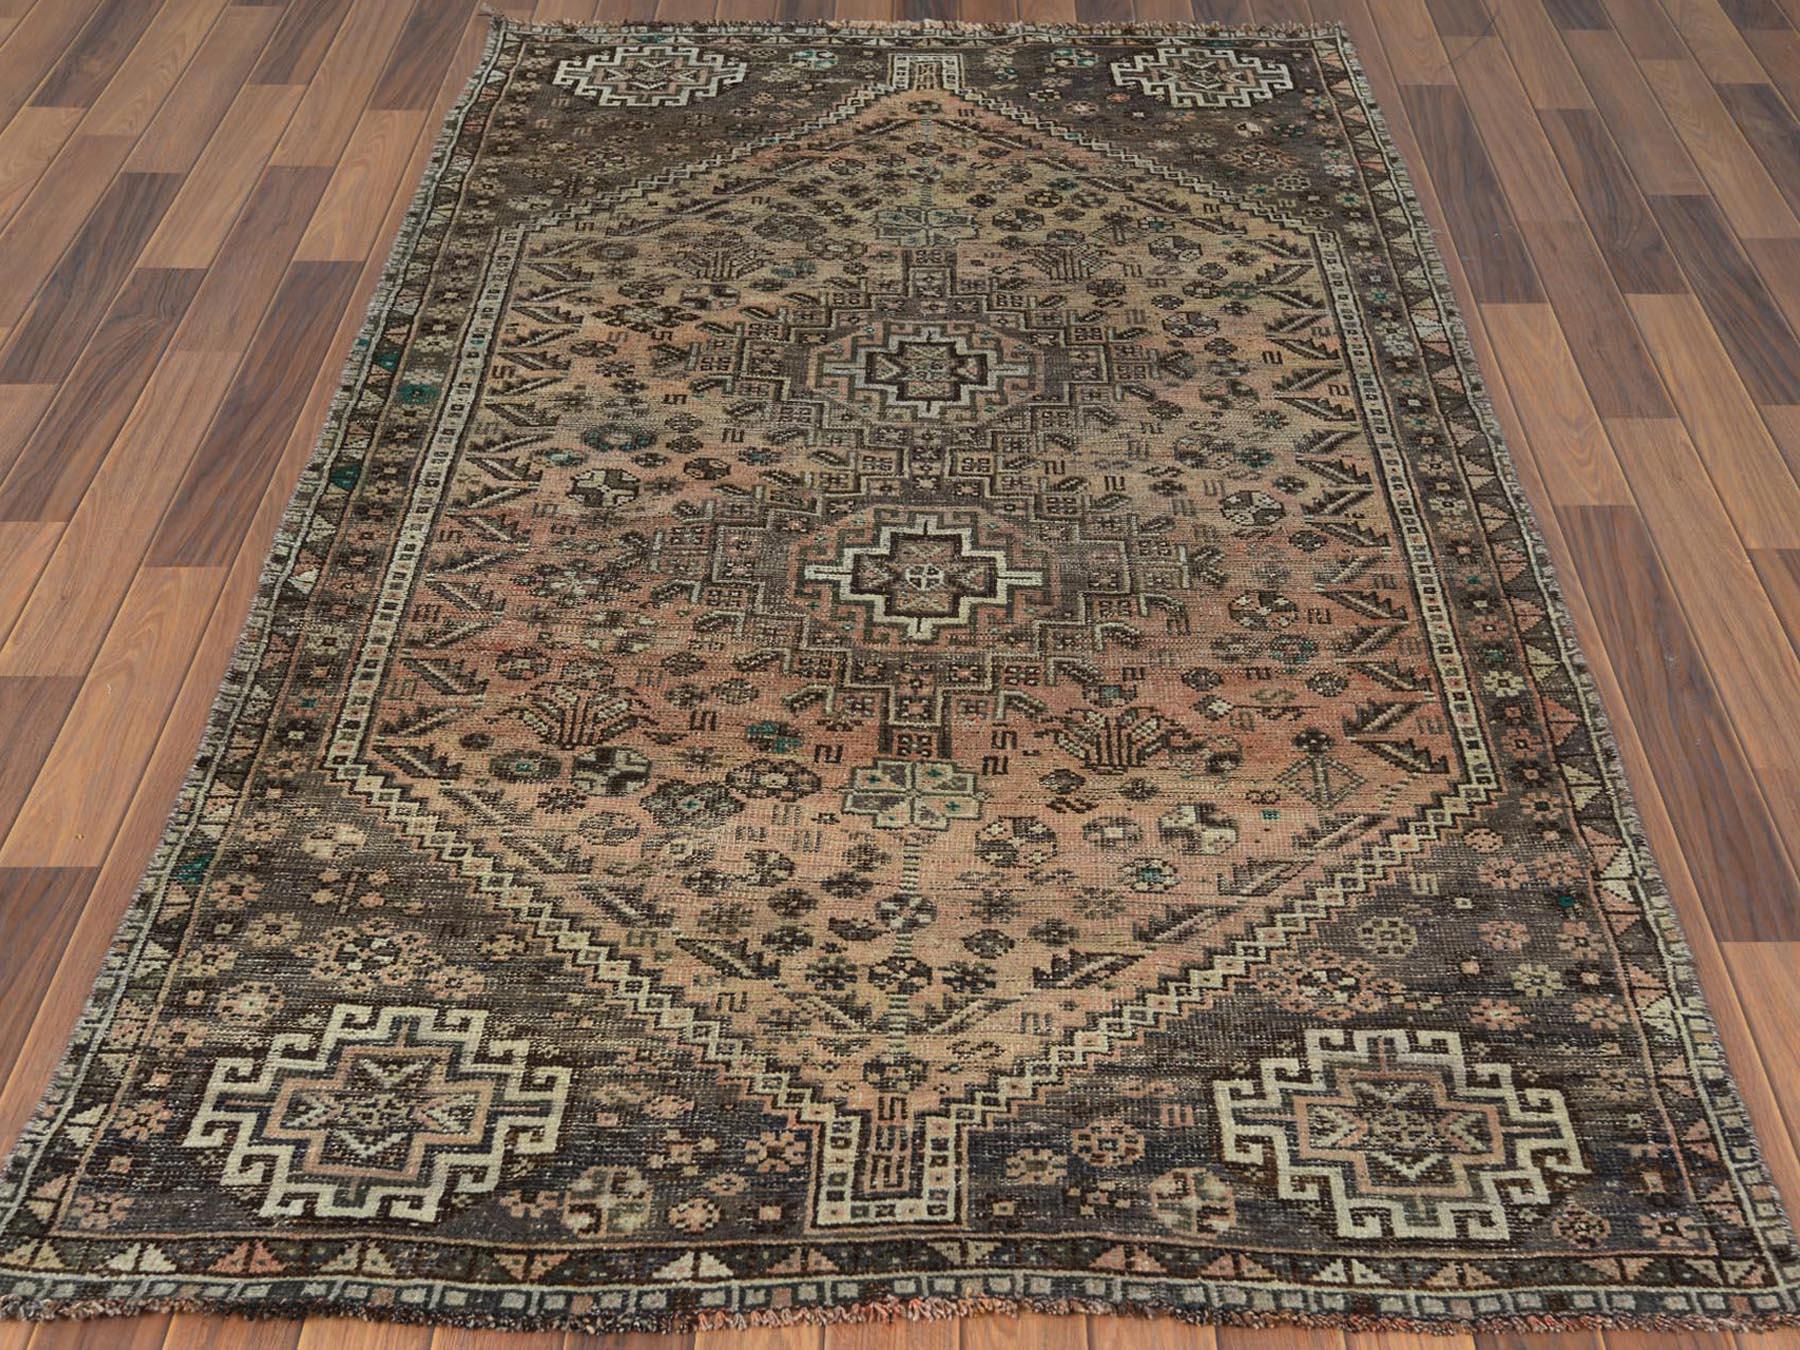 This fabulous hand-knotted carpet has been created and designed for extra strength and durability. This rug has been handcrafted for weeks in the traditional method that is used to make rugs. This is truly a one-of-kind piece.

Exact rug size in